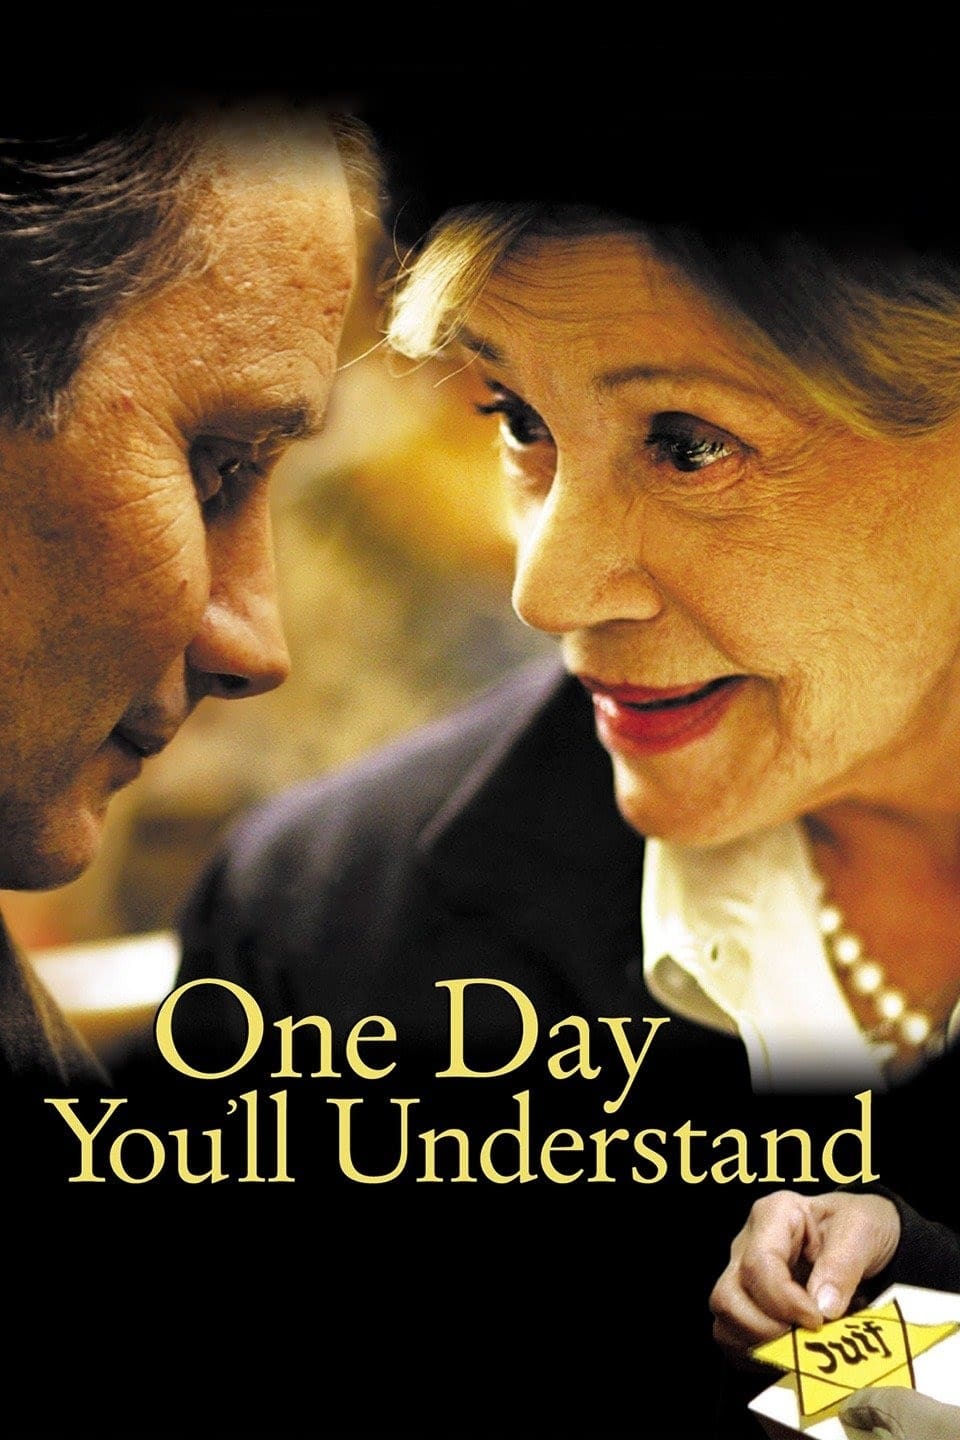 One Day You'll Understand (2008)